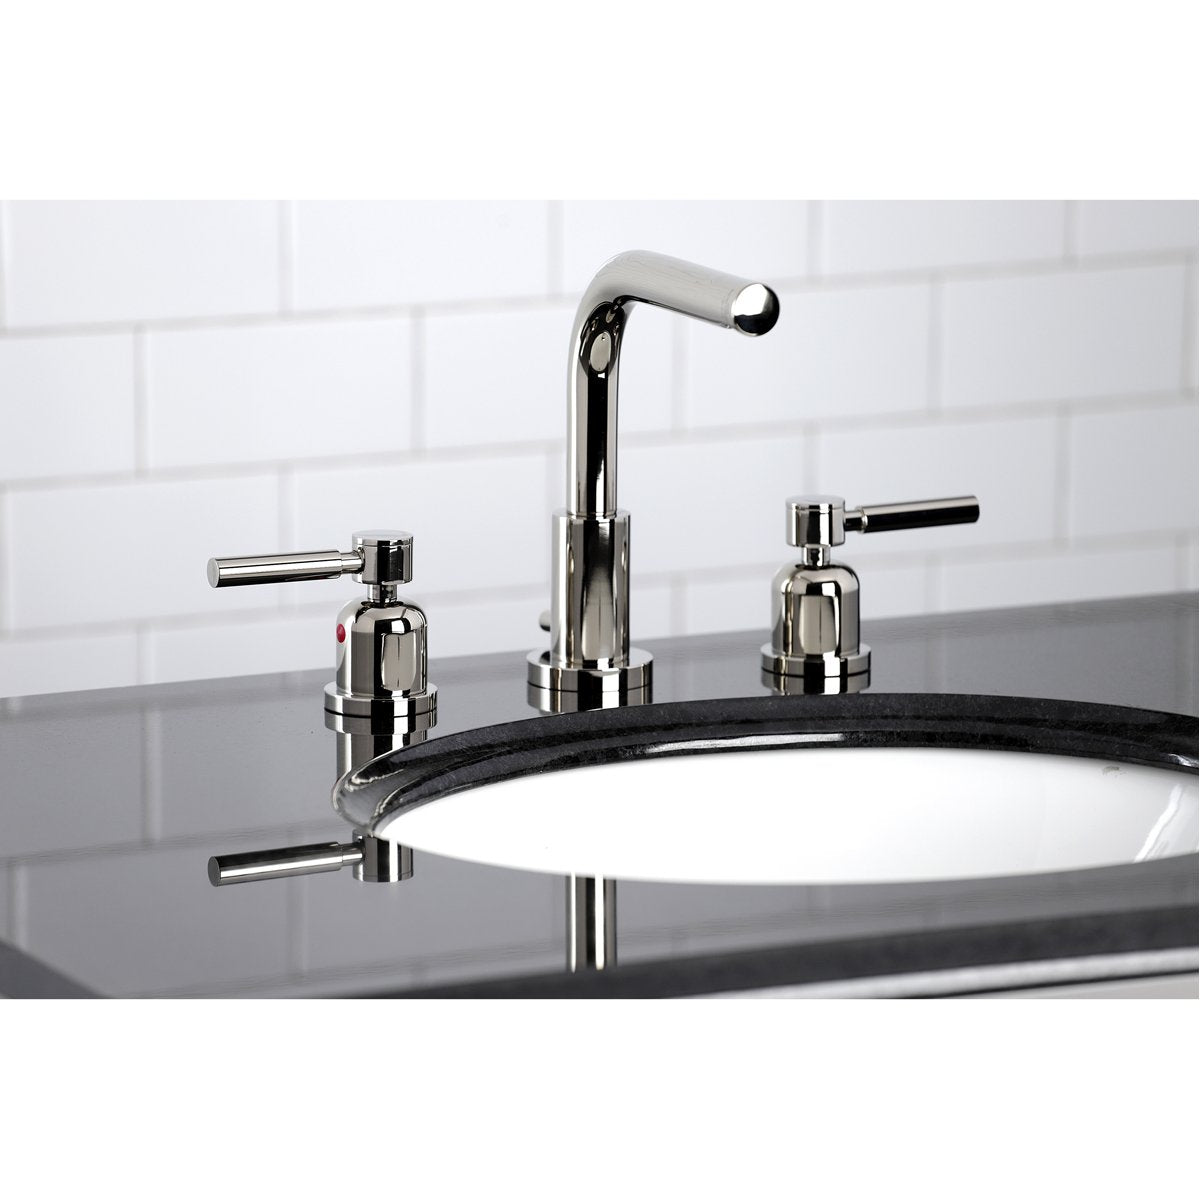 Kingston Brass Concord Fauceture 8-Inch Widespread Deck Mount Bathroom Faucet